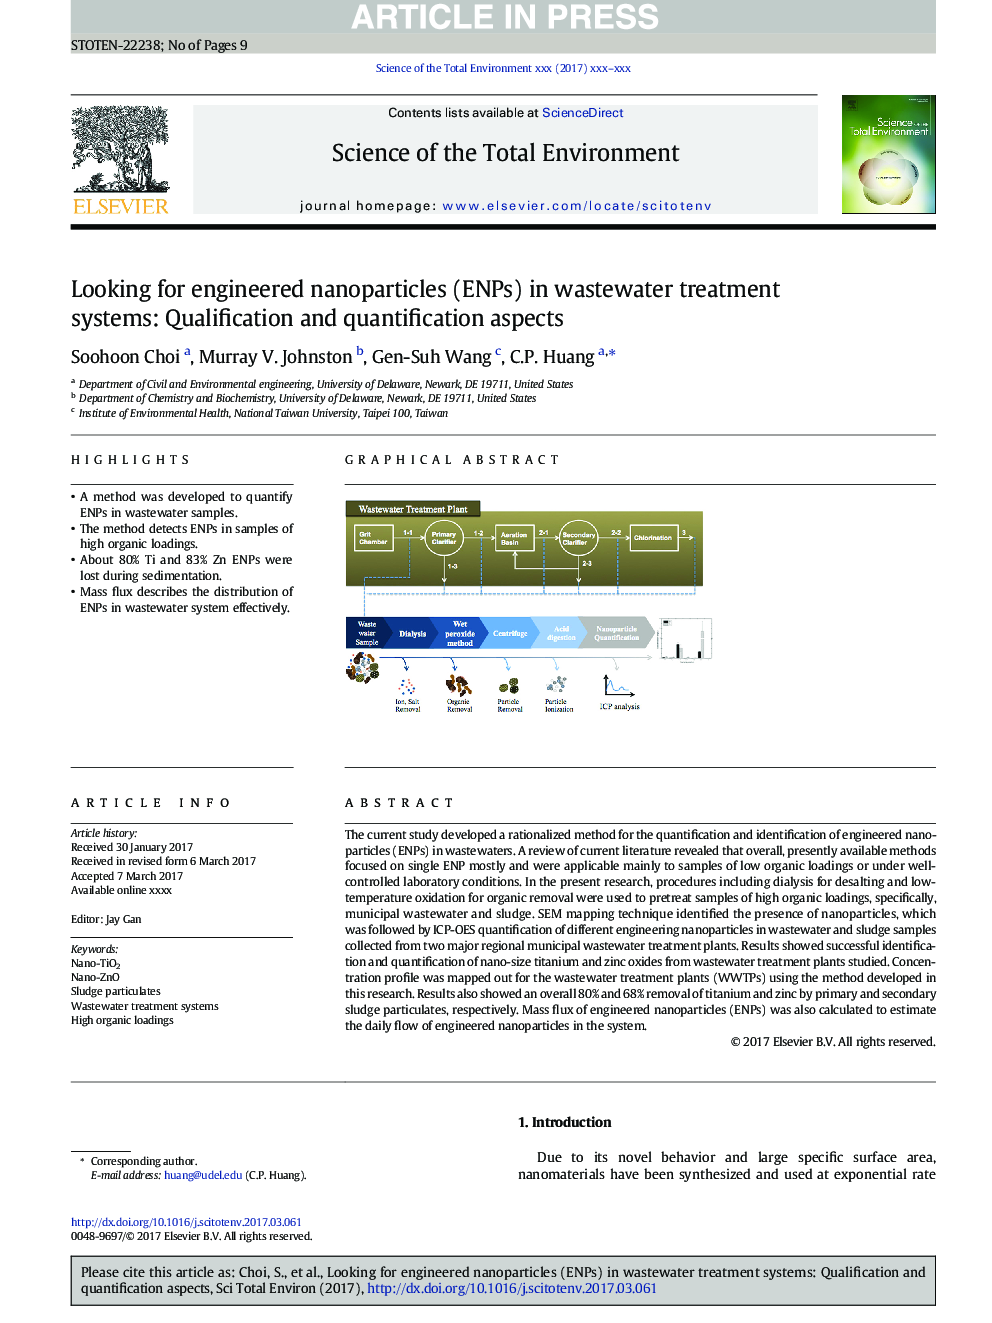 Looking for engineered nanoparticles (ENPs) in wastewater treatment systems: Qualification and quantification aspects